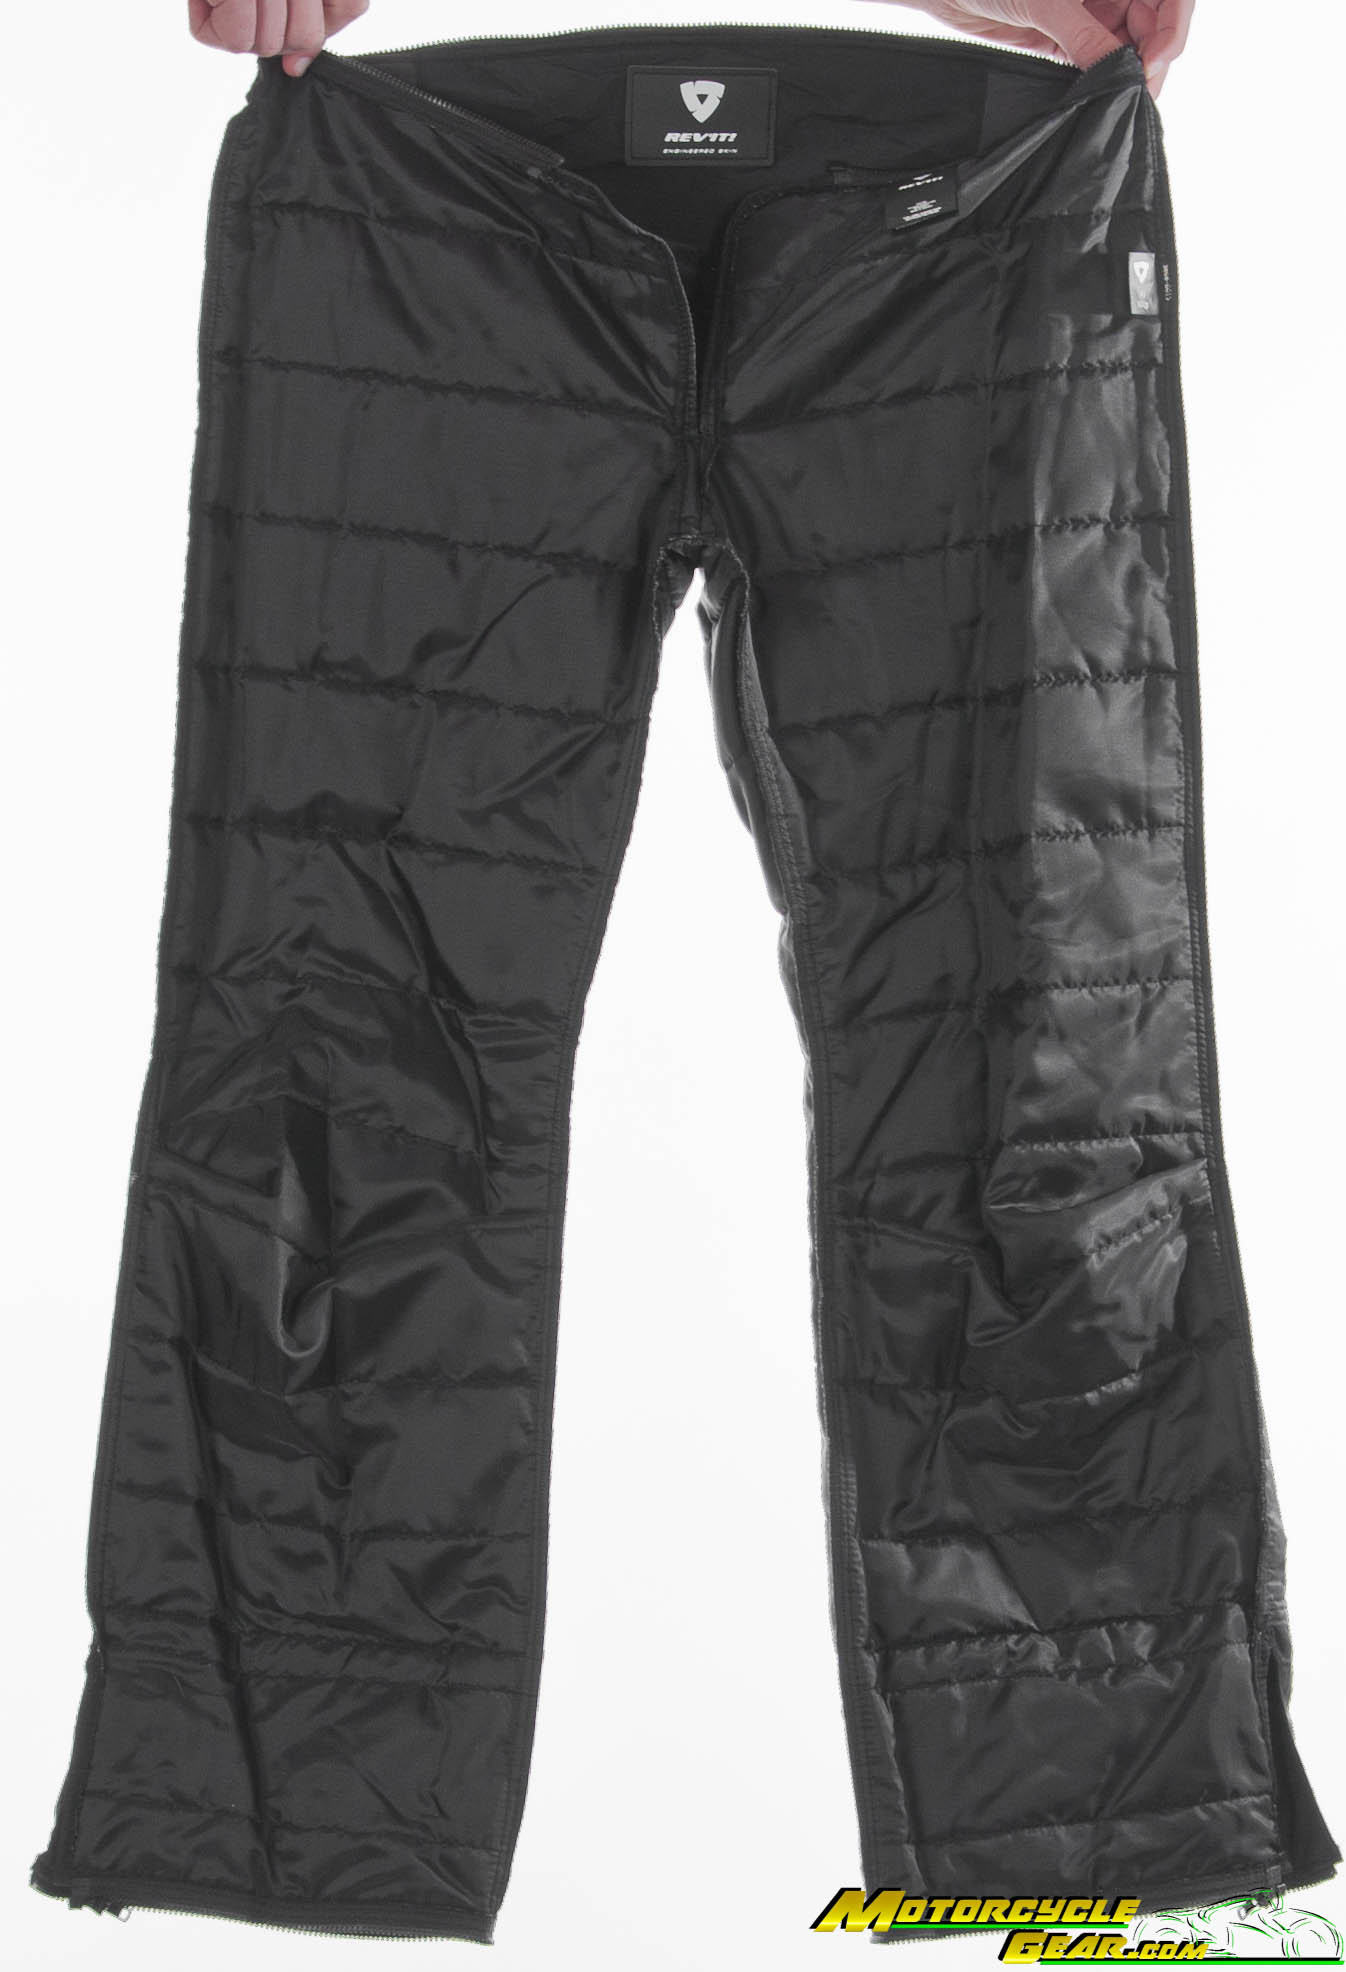 Viewing Images For REV'IT! Sand 4 H2O Pants :: MotorcycleGear.com